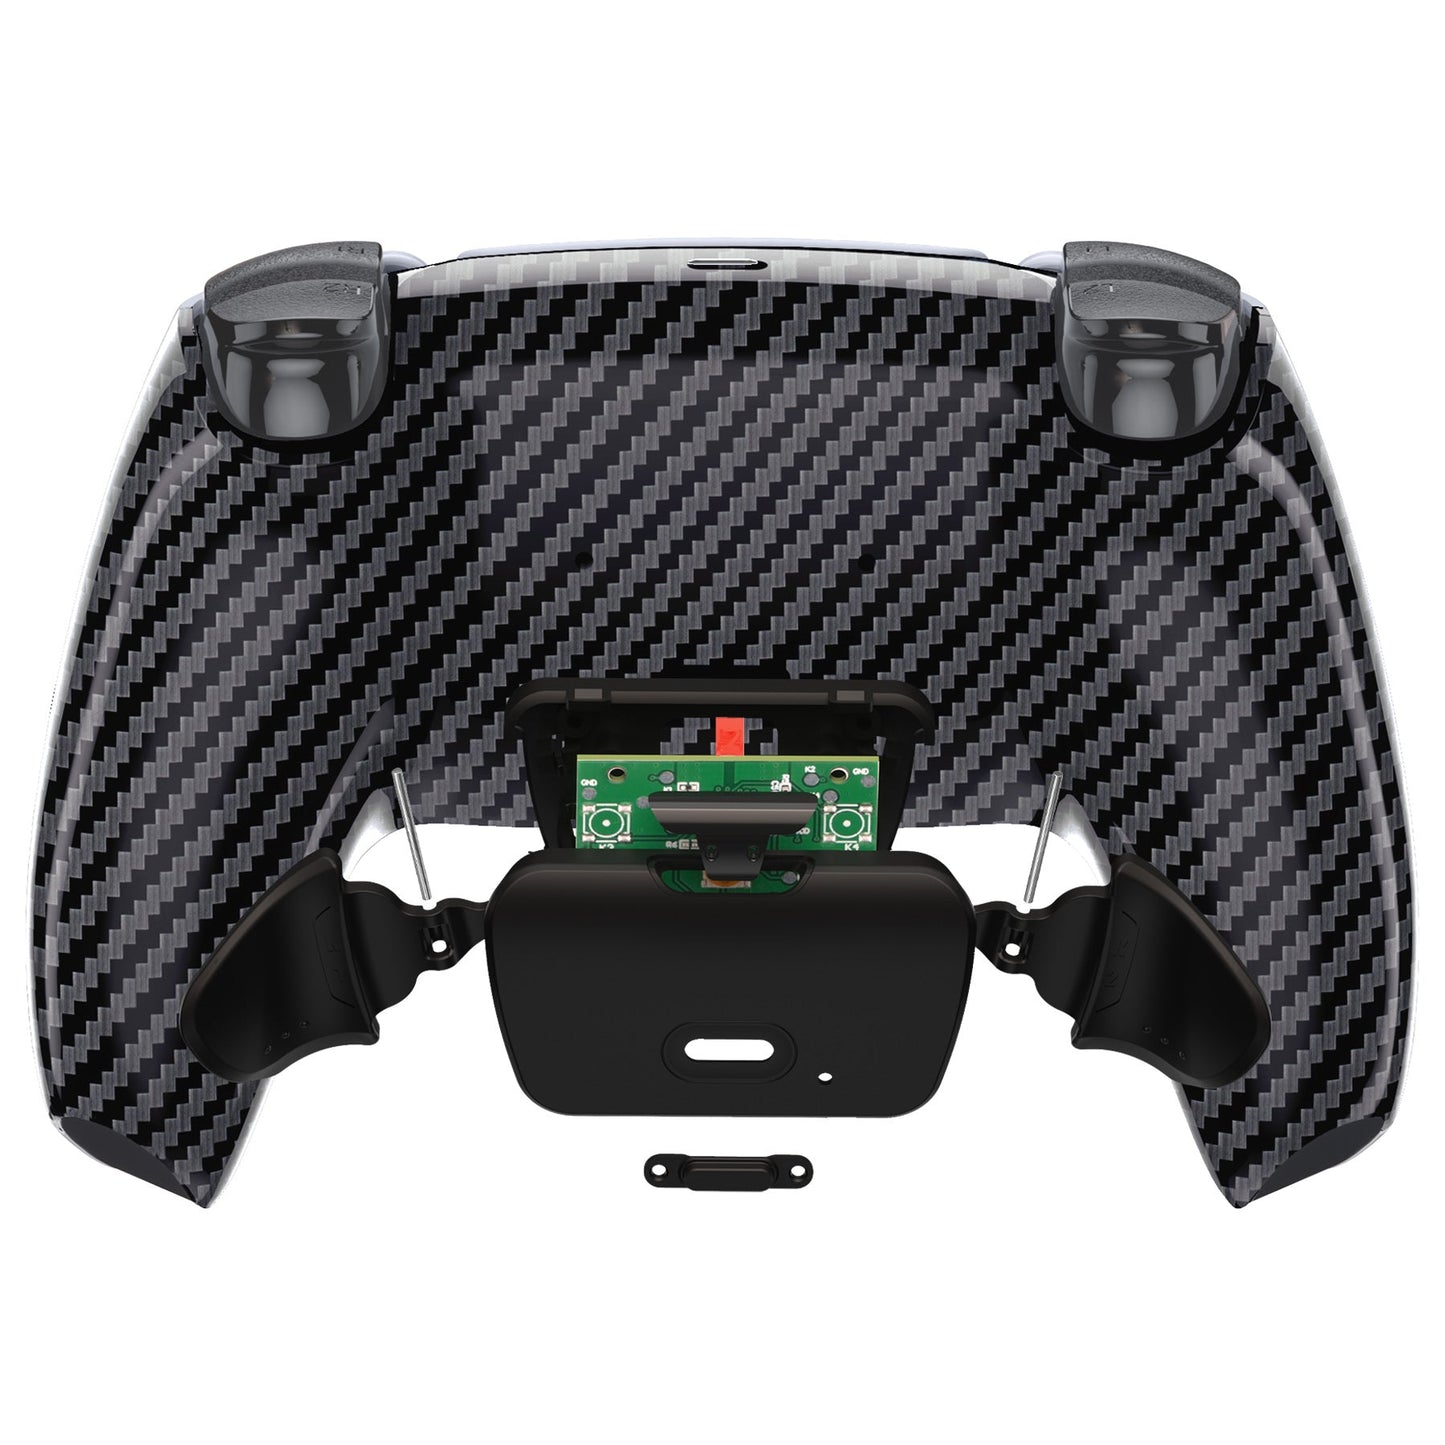 Graphite Carbon Fiber Pattern Back Paddles Remappable Rise Remap Kit for ps5 Controller, Upgrade Board & Redesigned Back Shell & Back Buttons Attachment for ps5 Controller - Controller NOT Included - XPFS2002G2